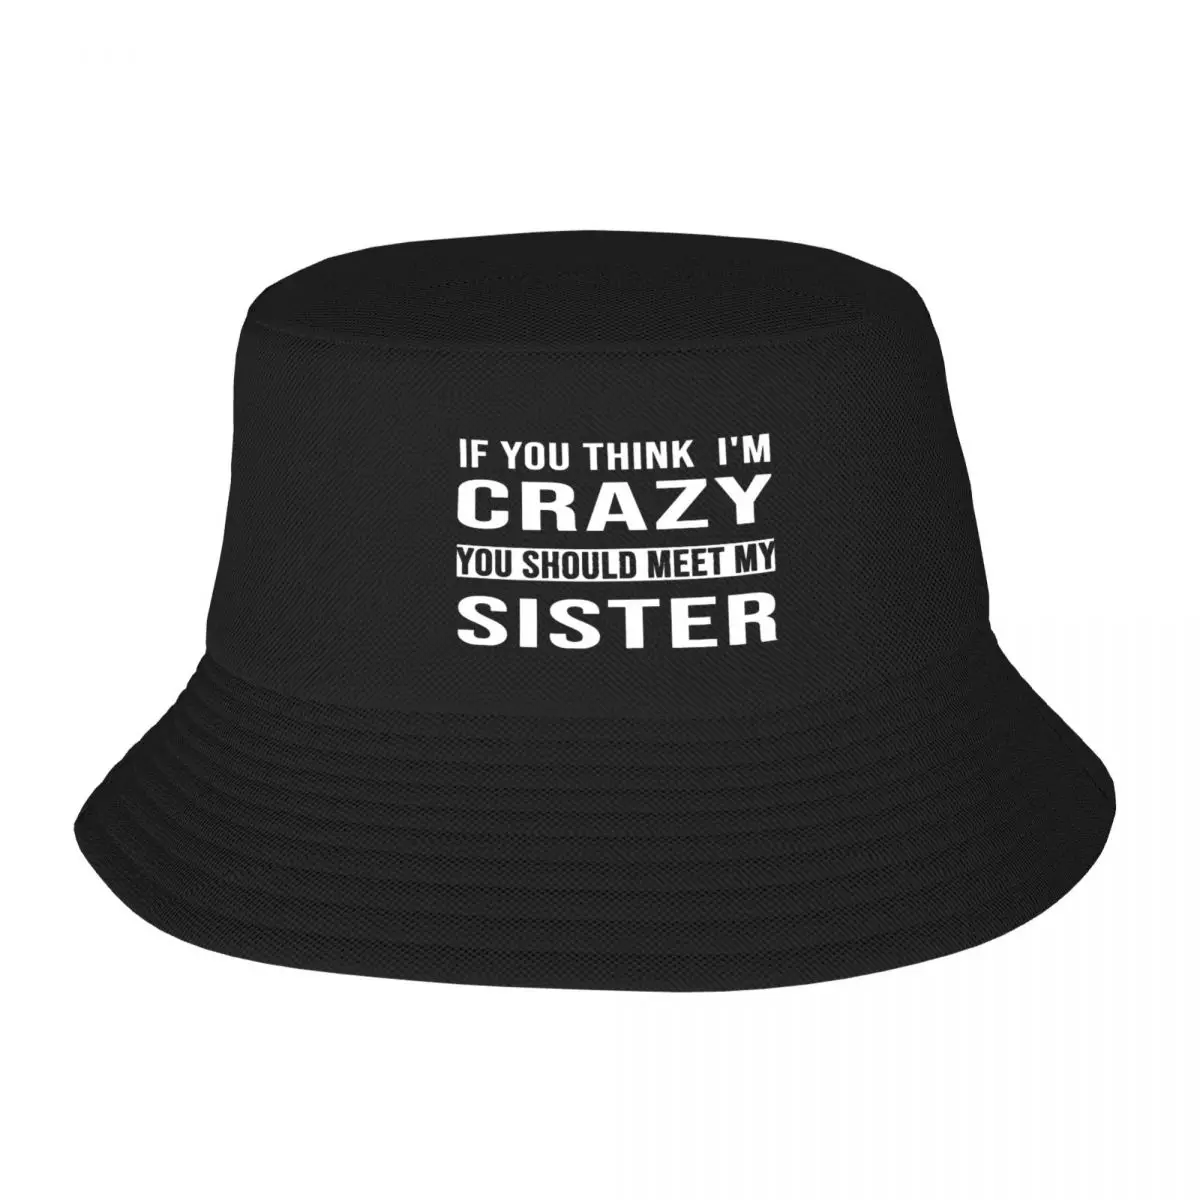 

F You Think I'm Crazy You Should Meet My Sister Fisherman's Hat, Adult Cap Customizable Light For Daily Nice Gift